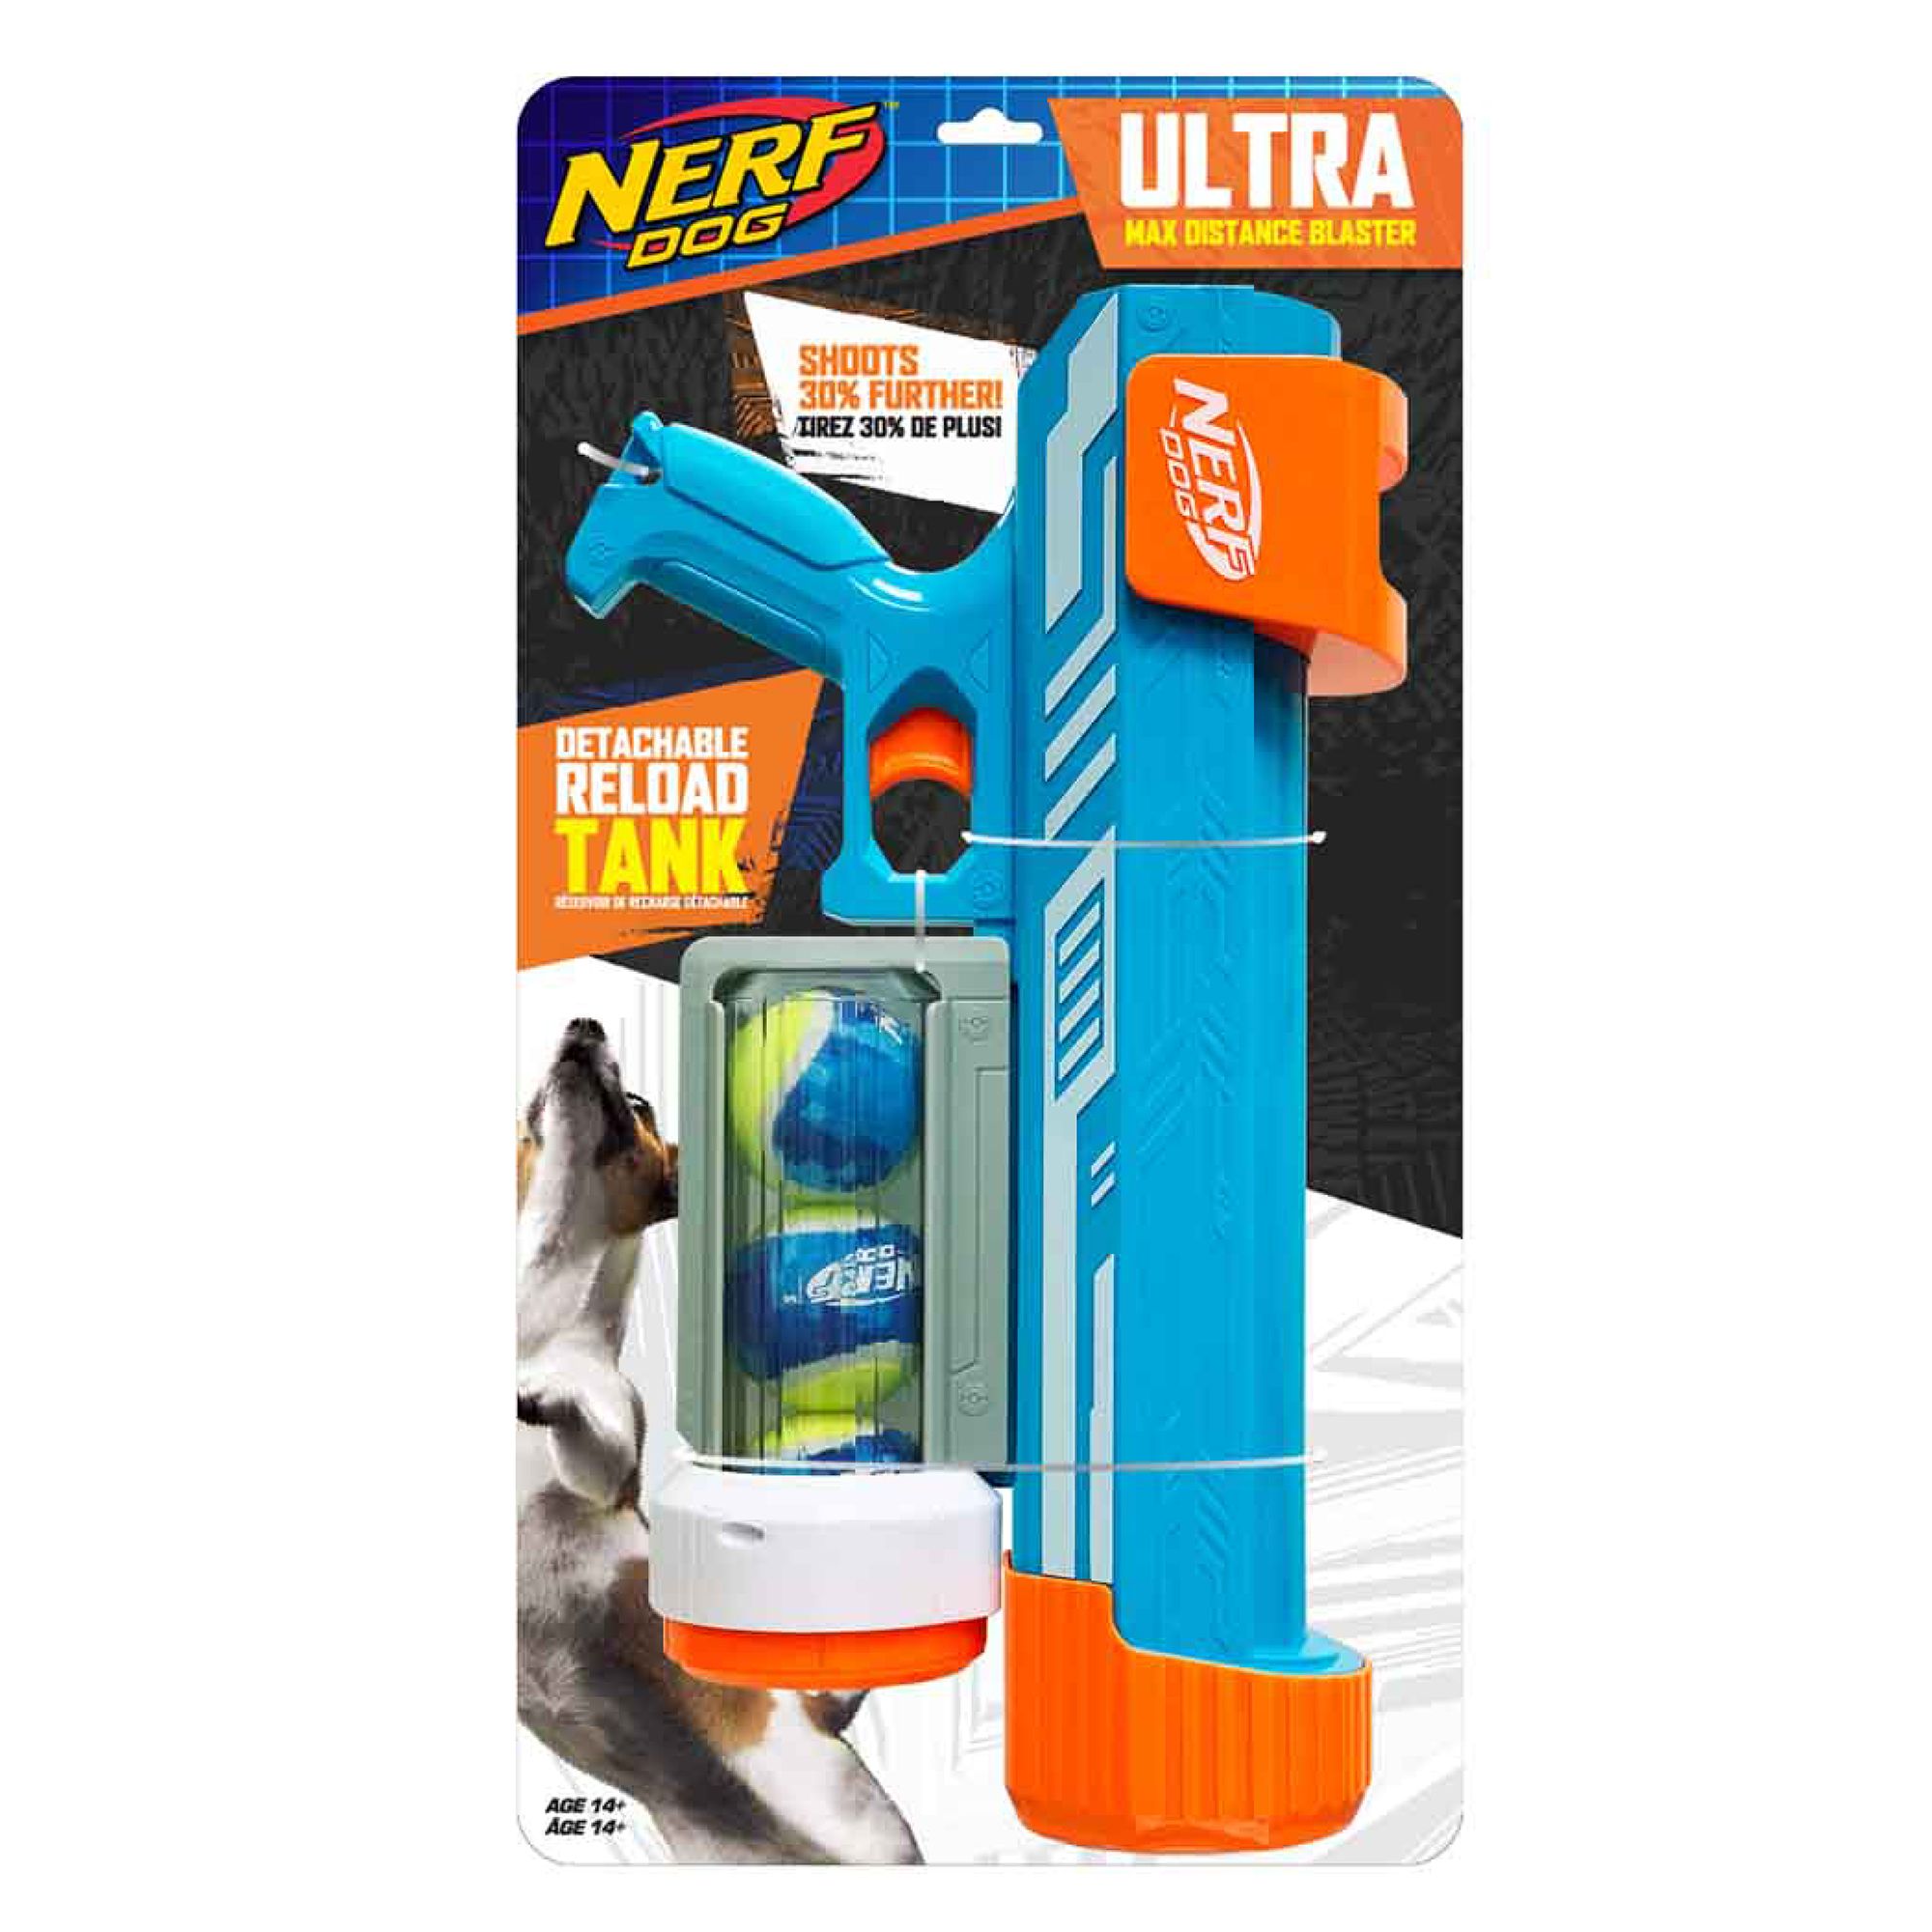 Nerf&amp;trade; Dog Ultra Max Distance Tennis Ball Blaster Dog Toy - 3 Pack